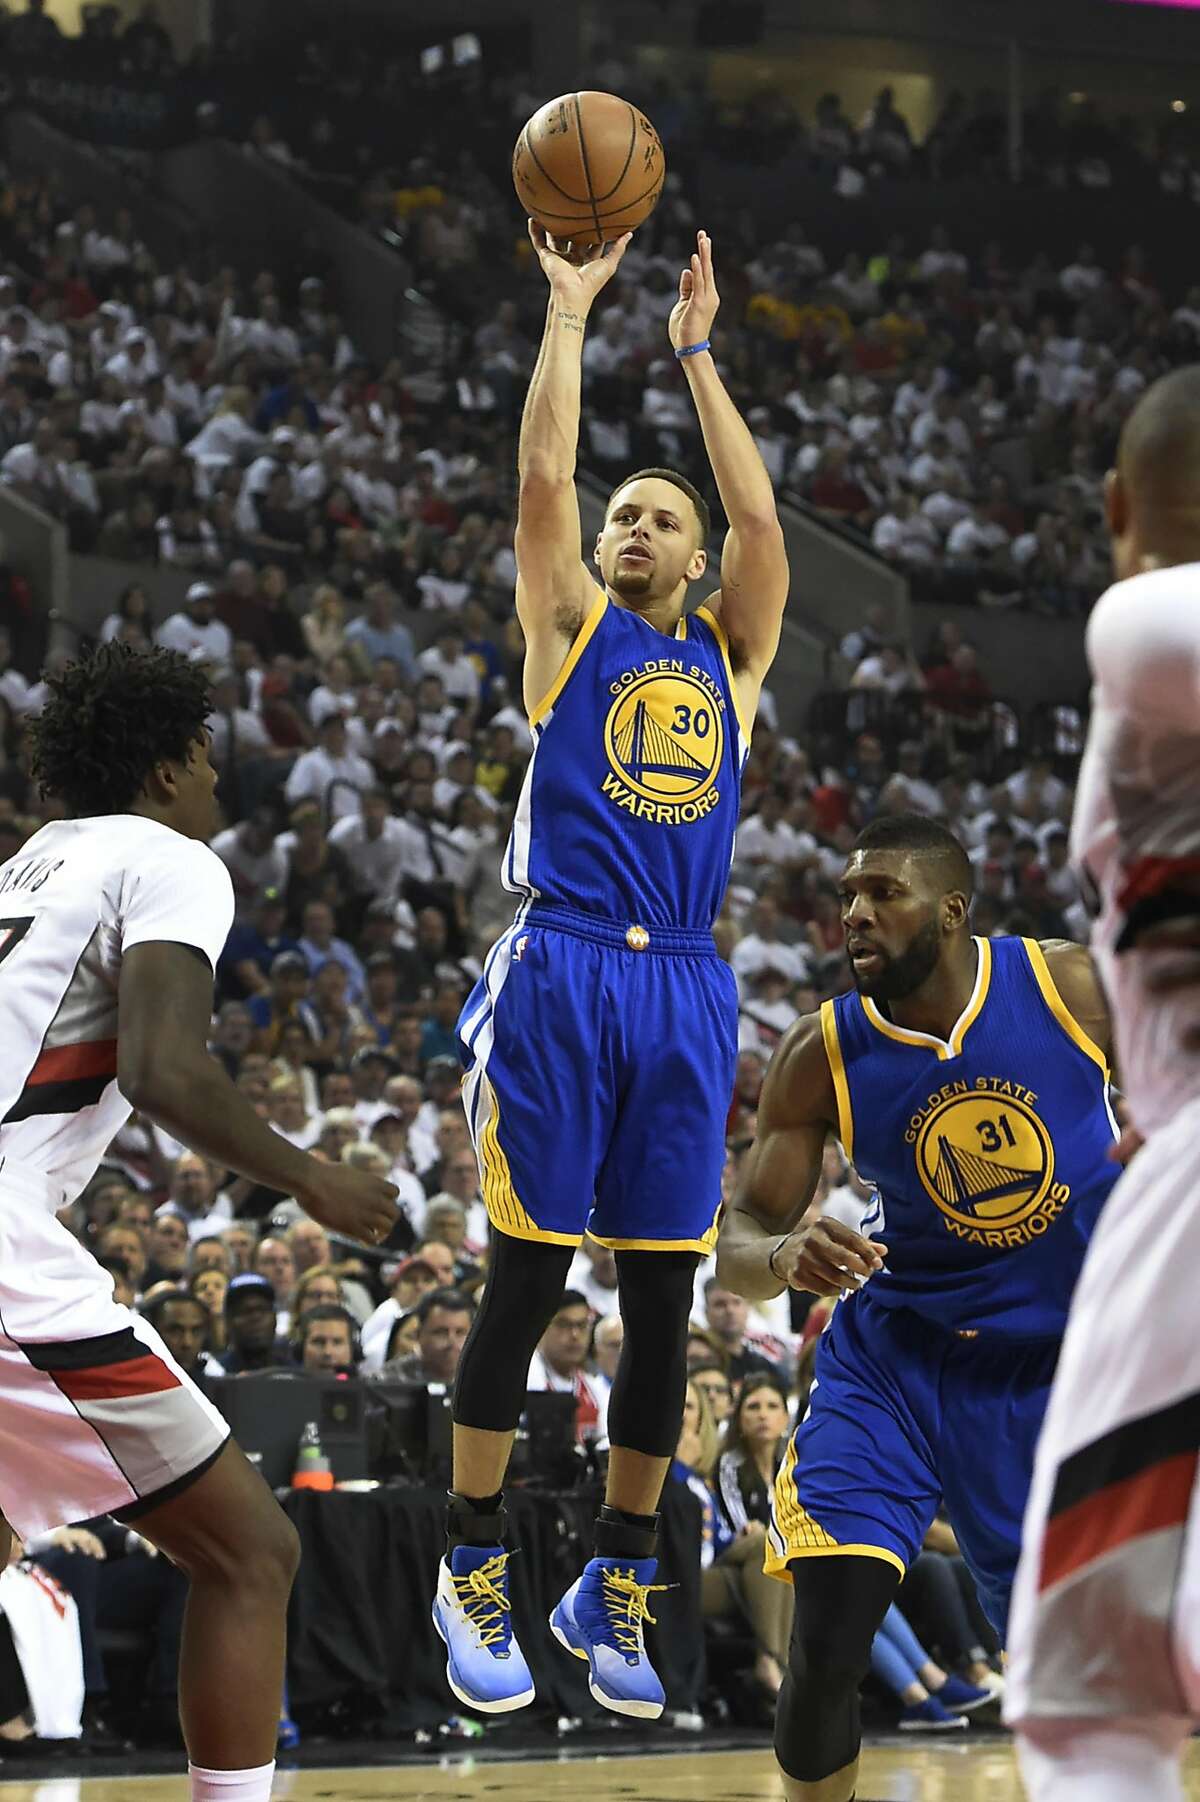 Stephen Curry #30 of the Golden State Warriors shoots the ball on Ed Davis #17 of the Portland Trail Blazers during the first quarter of Game Four of the Western Conference Semifinals during the 2016 NBA Playoffs at the Moda Center on May 9, 2016 in Portland, Oregon. NOTE TO USER: User expressly acknowledges and agrees that by downloading and/or using this photograph, user is consenting to the terms and conditions of the Getty Images License Agreement. (Photo by Steve Dykes/Getty Images)